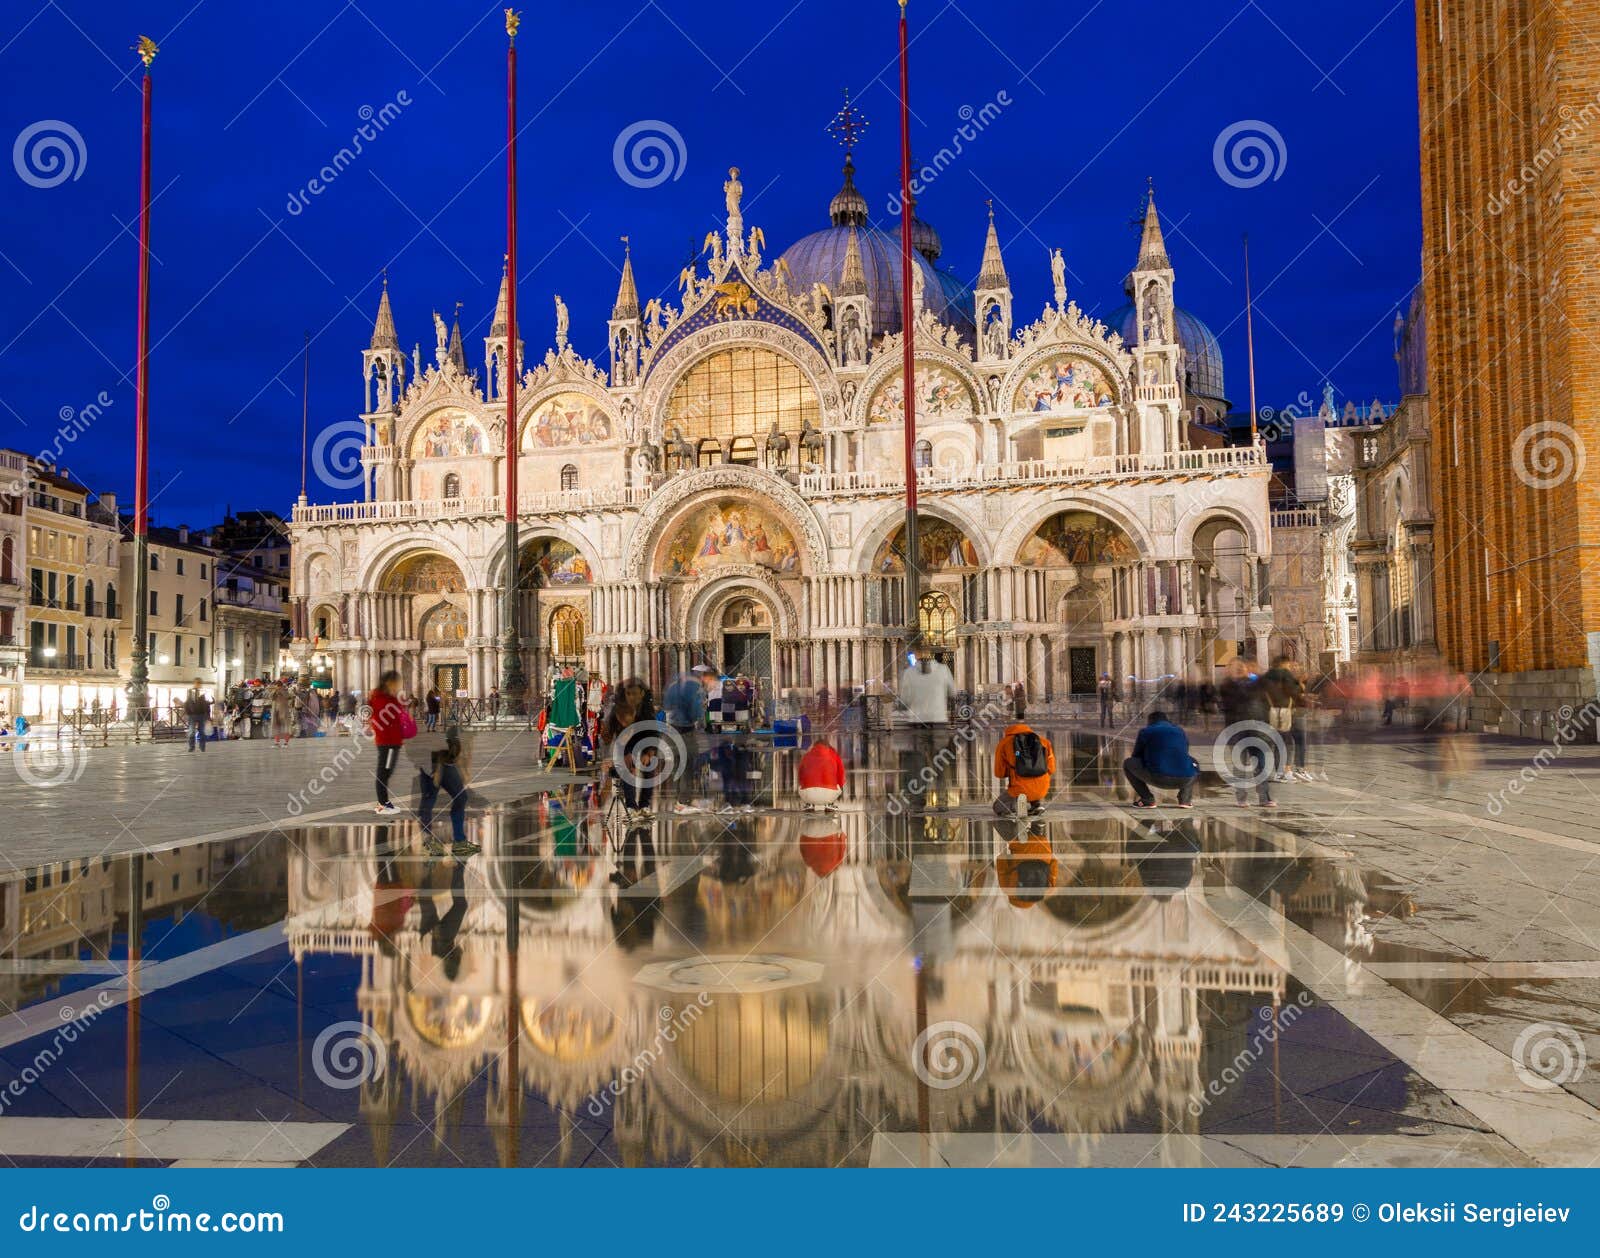 The Patriarchal Cathedral Basilica Of Saint Mark At The Piazza San Marco St Mark`s Square